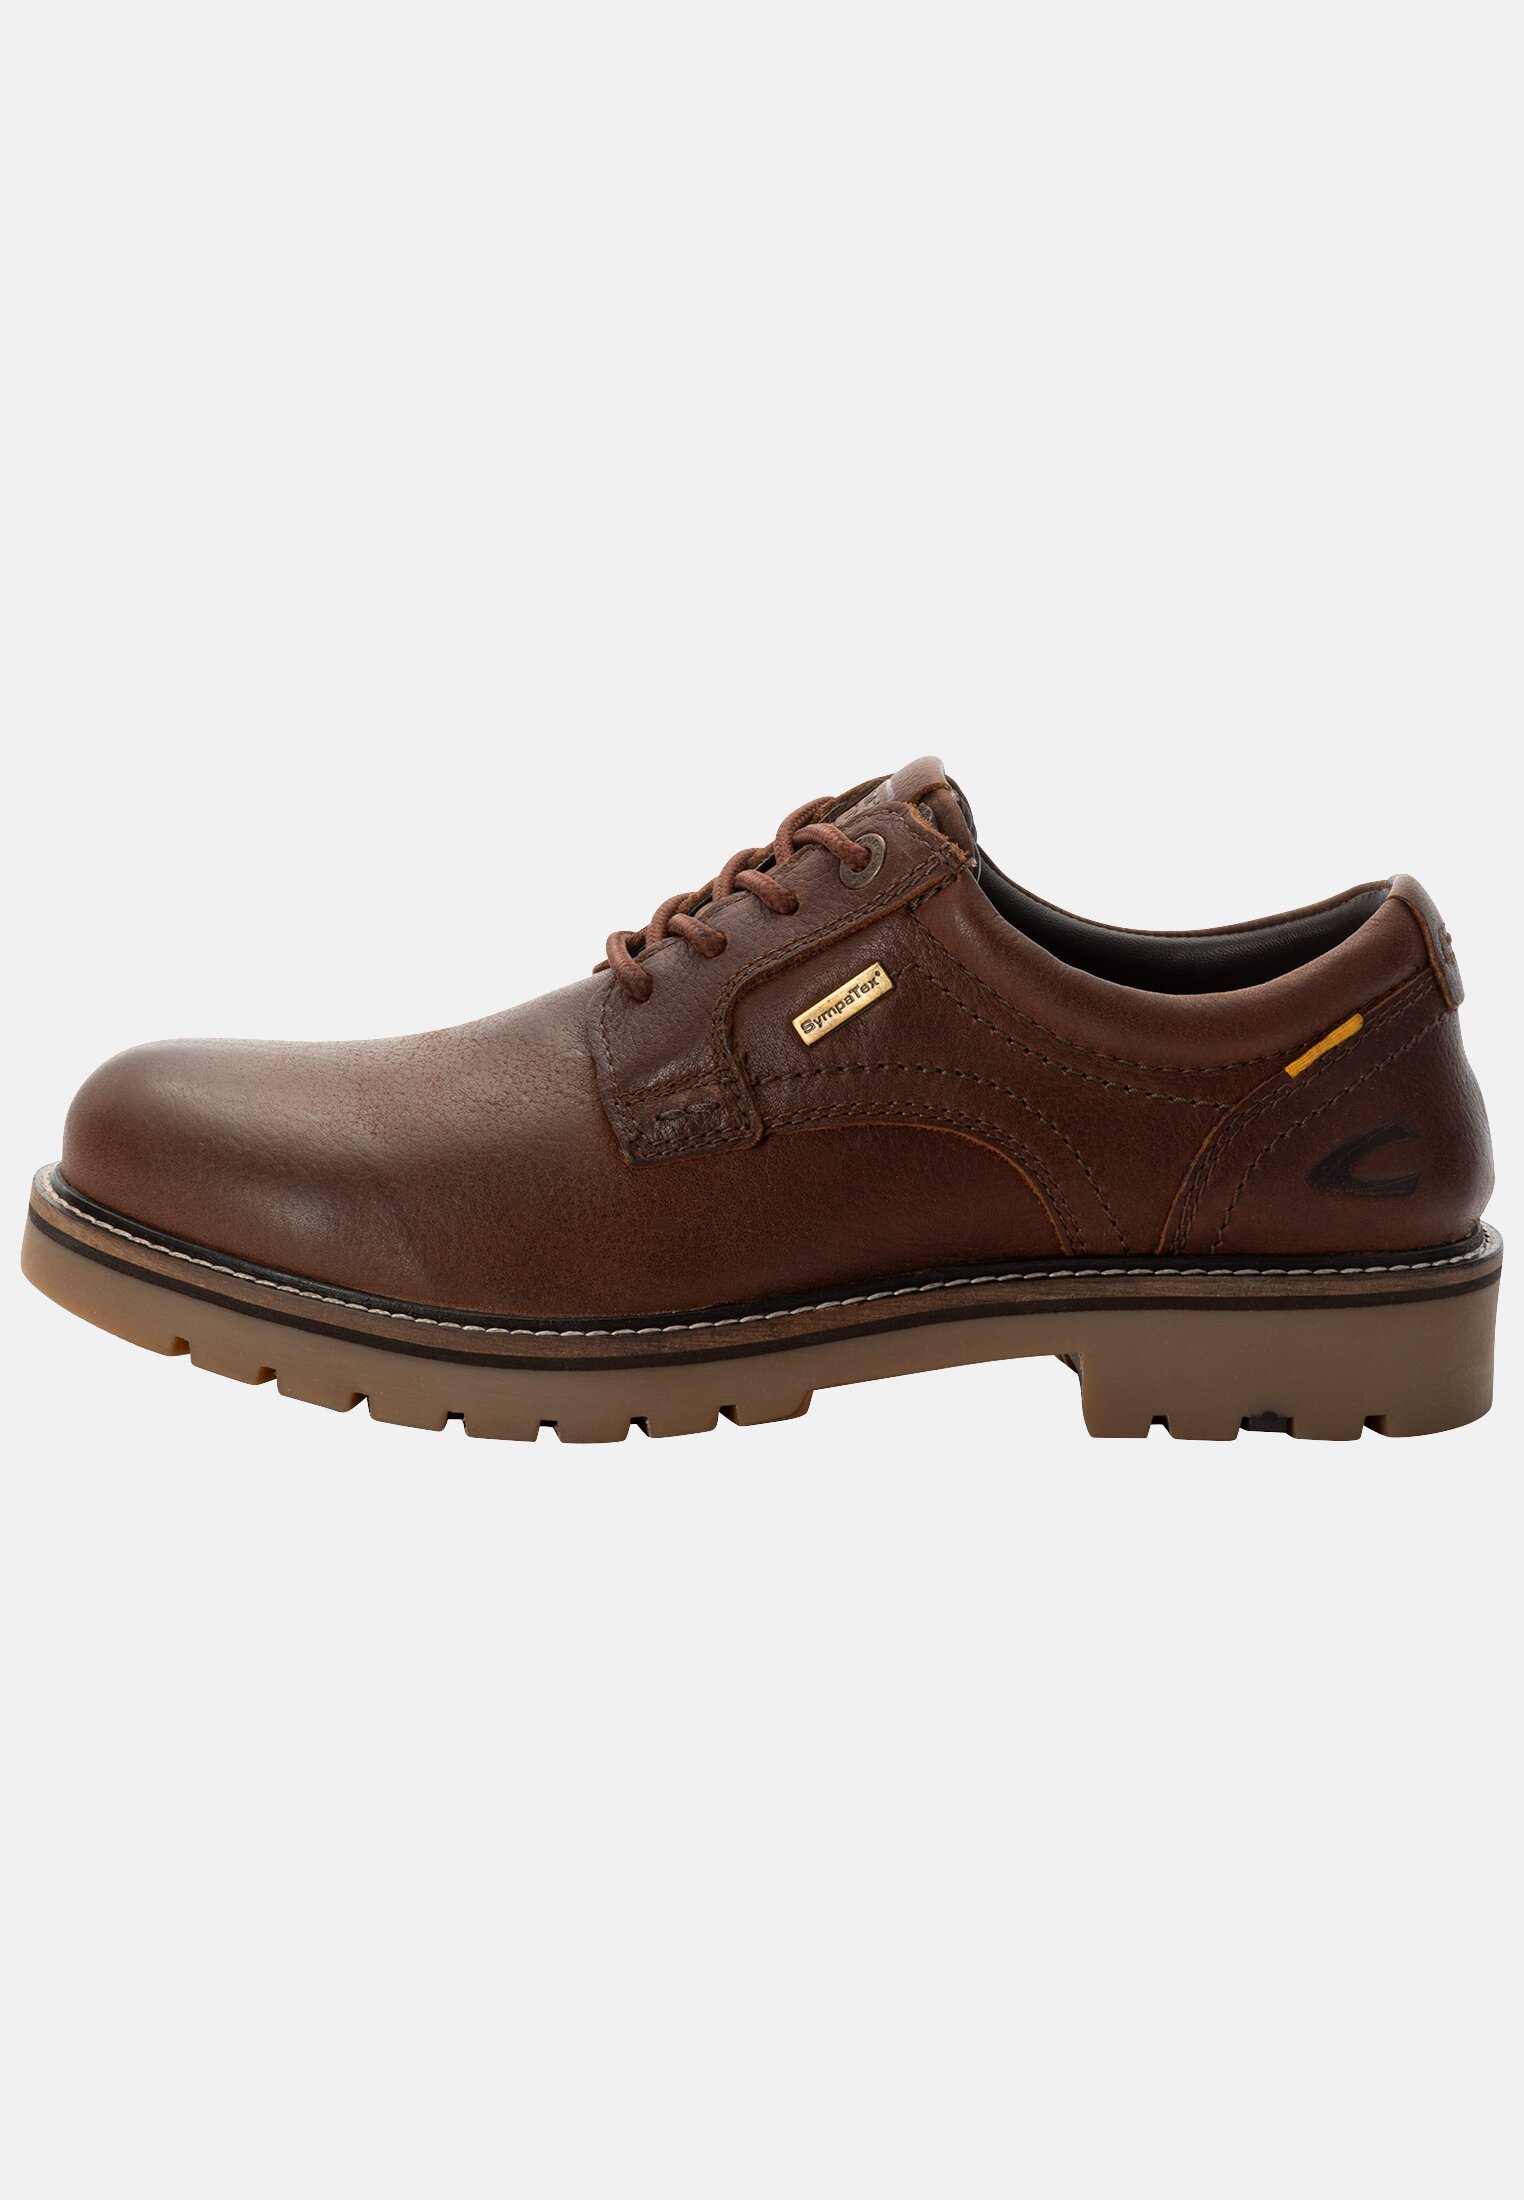 Camel Active Lace-up shoes made of genuine cowhide leather